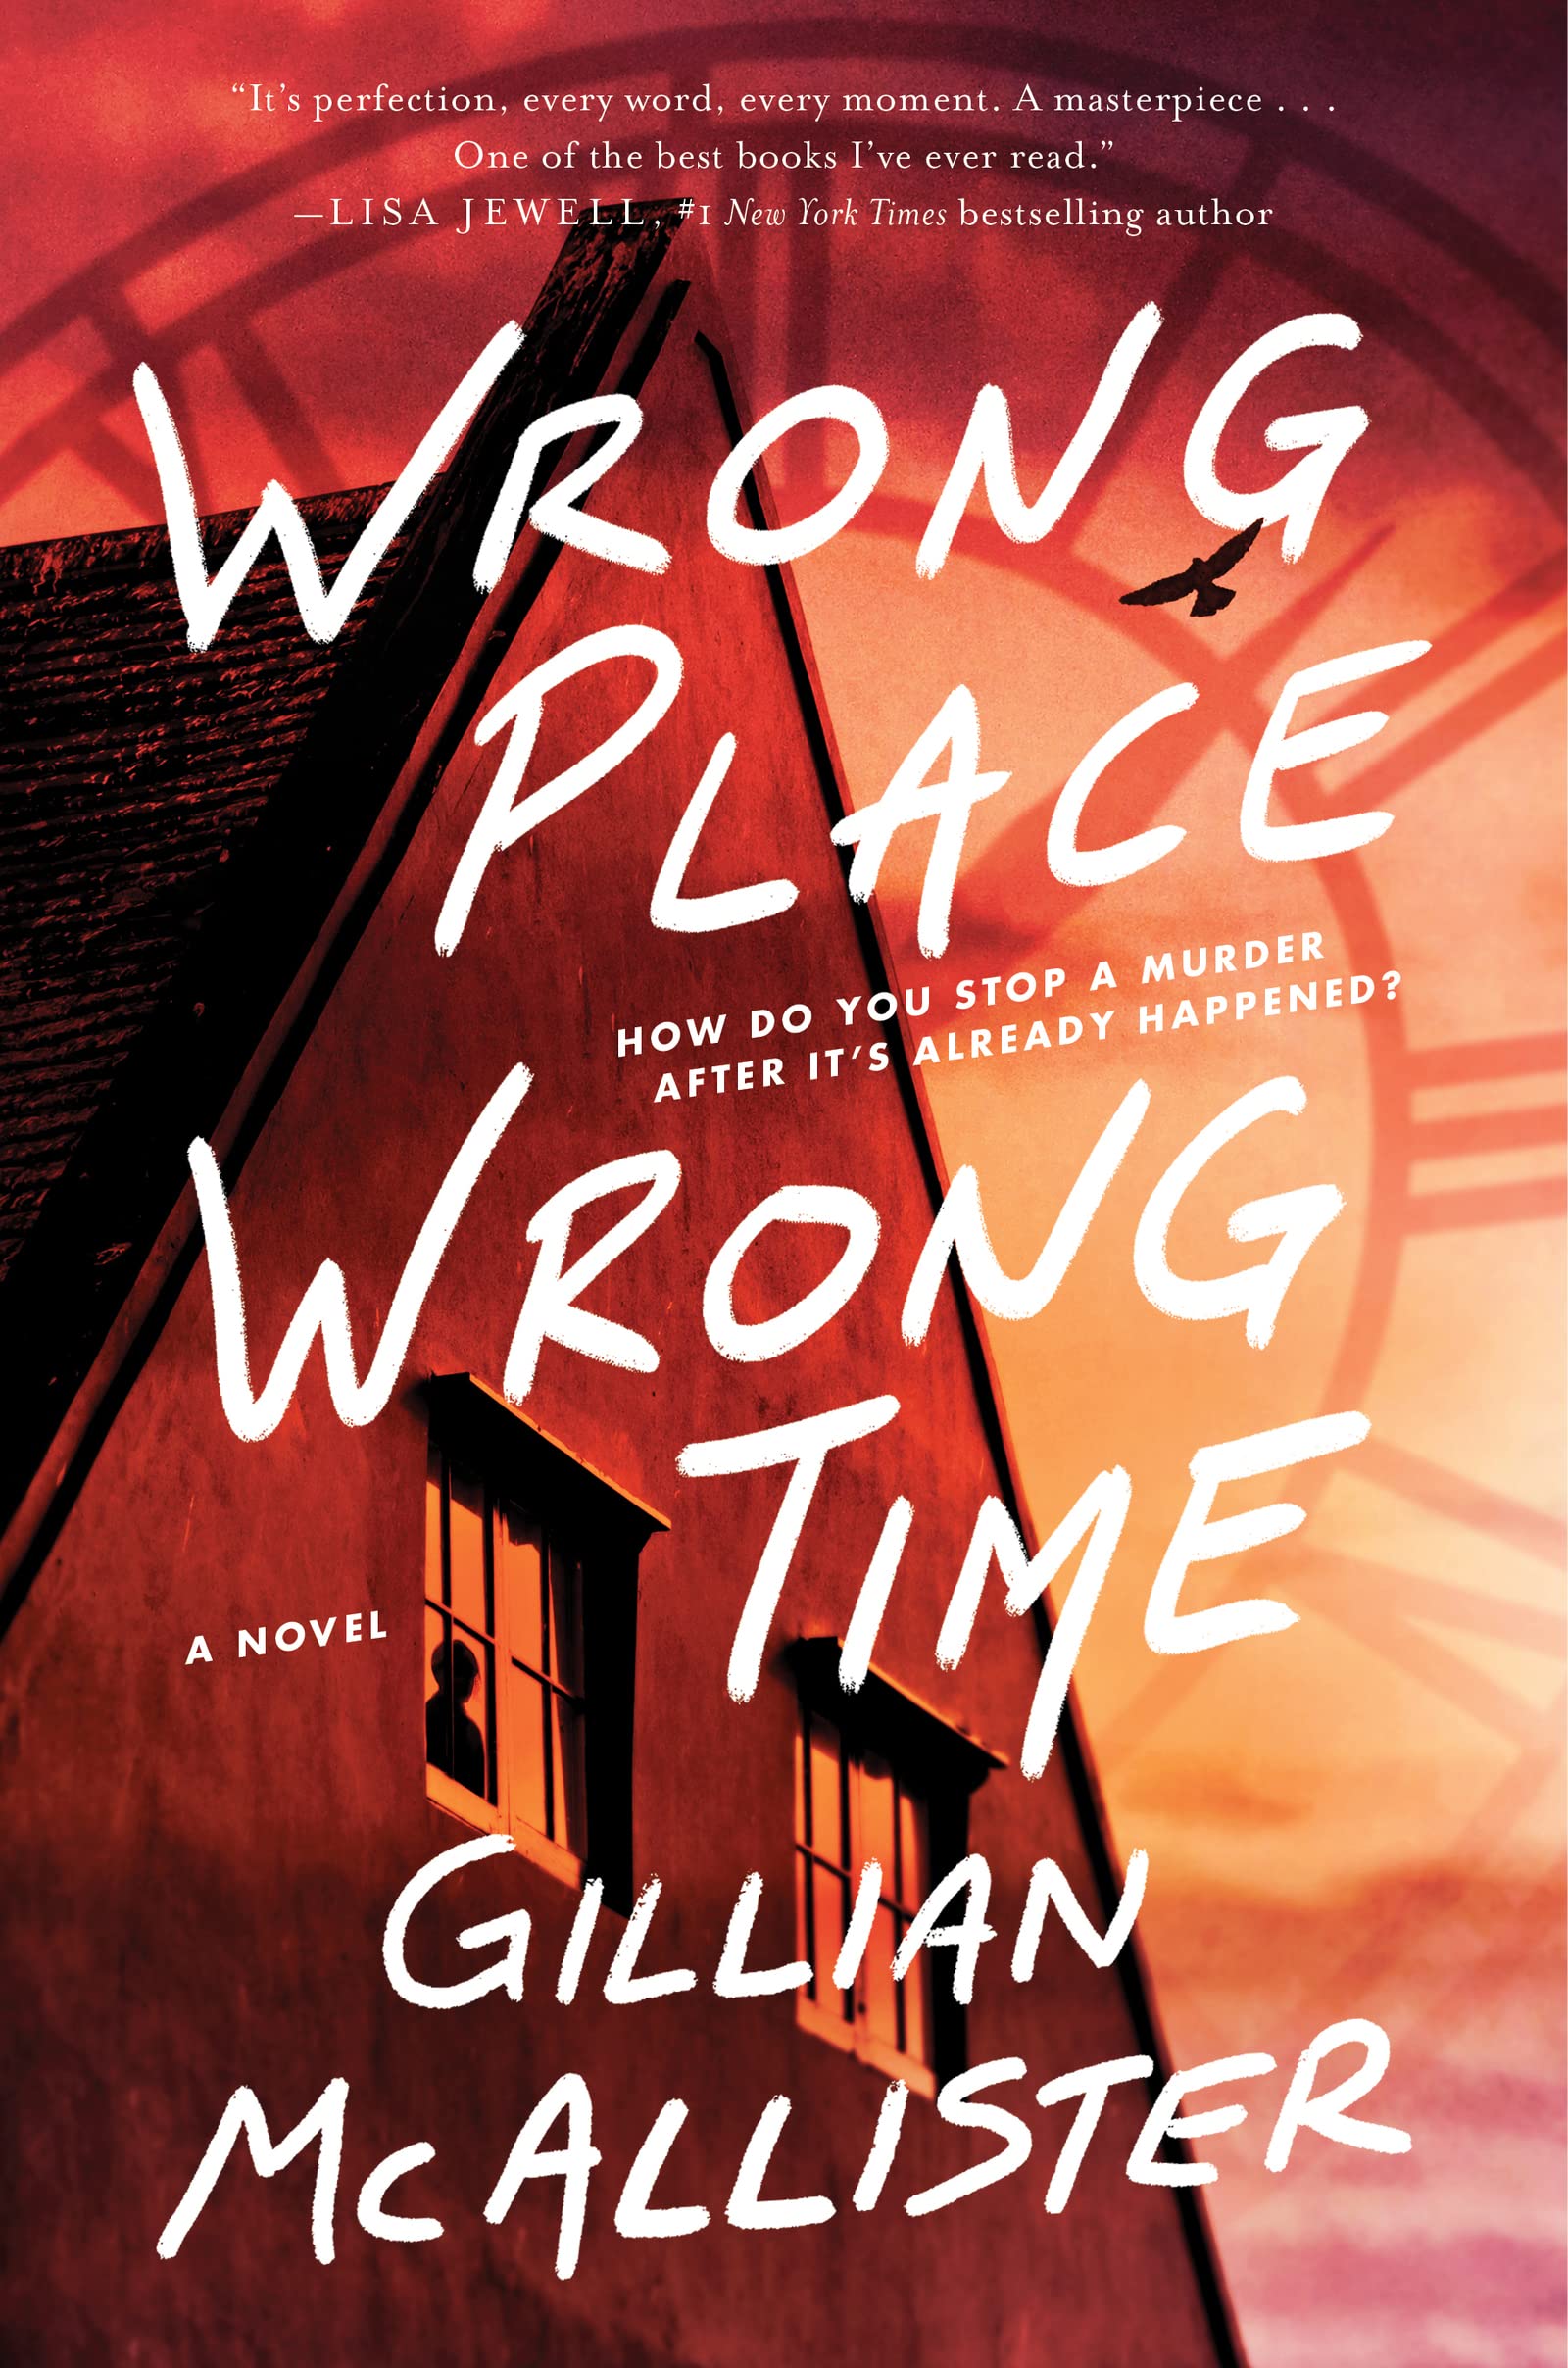 Image for "Wrong Place Wrong Time"